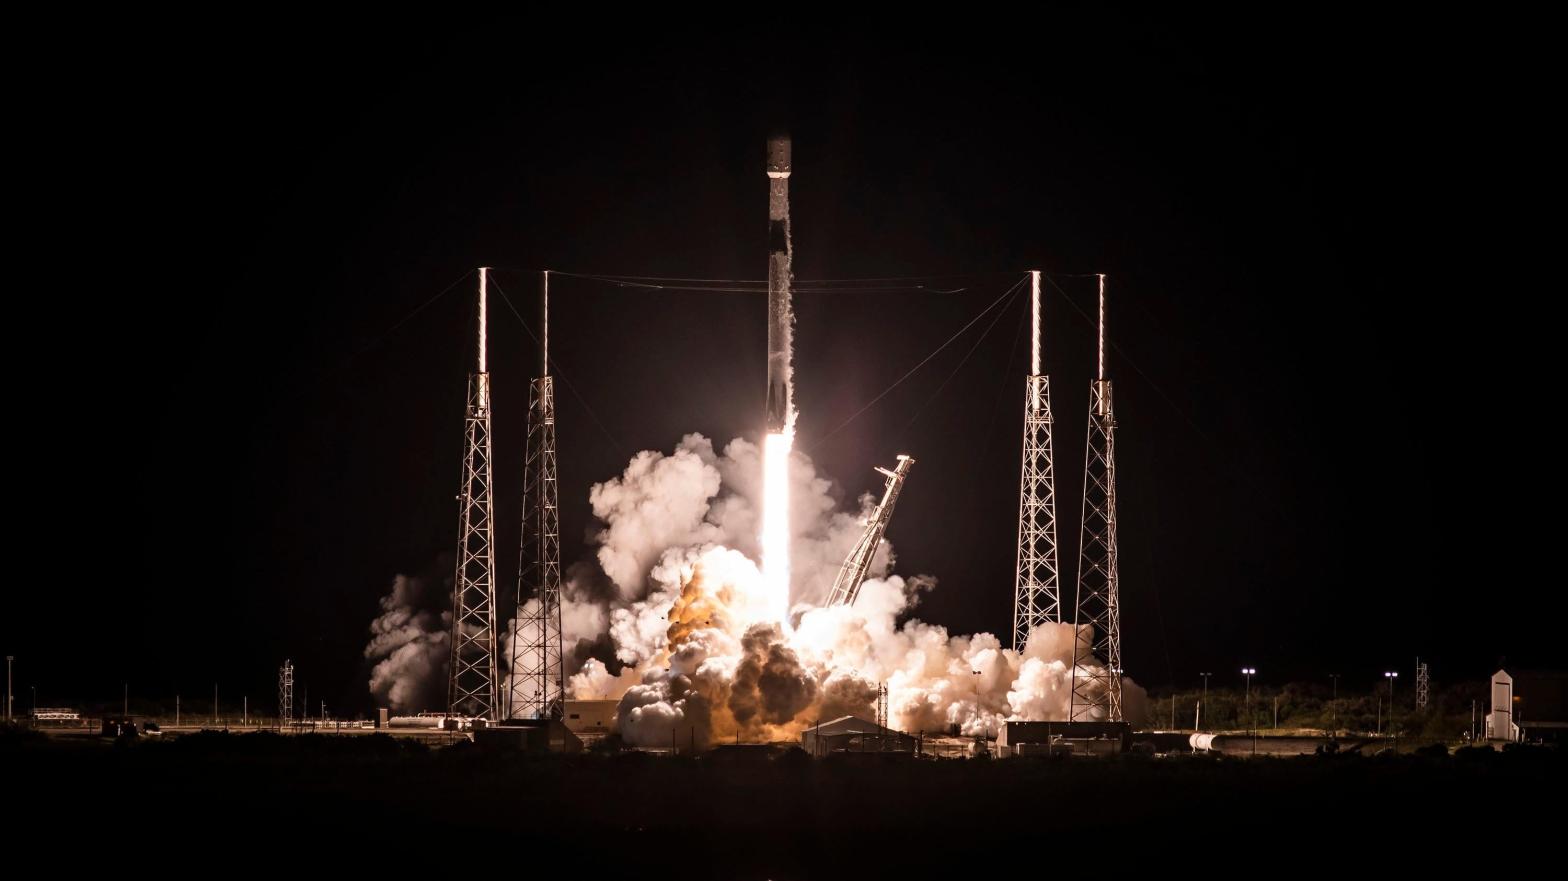 Falcon 9 launching a pair of communication satellites on December 17. (Photo: SpaceX)